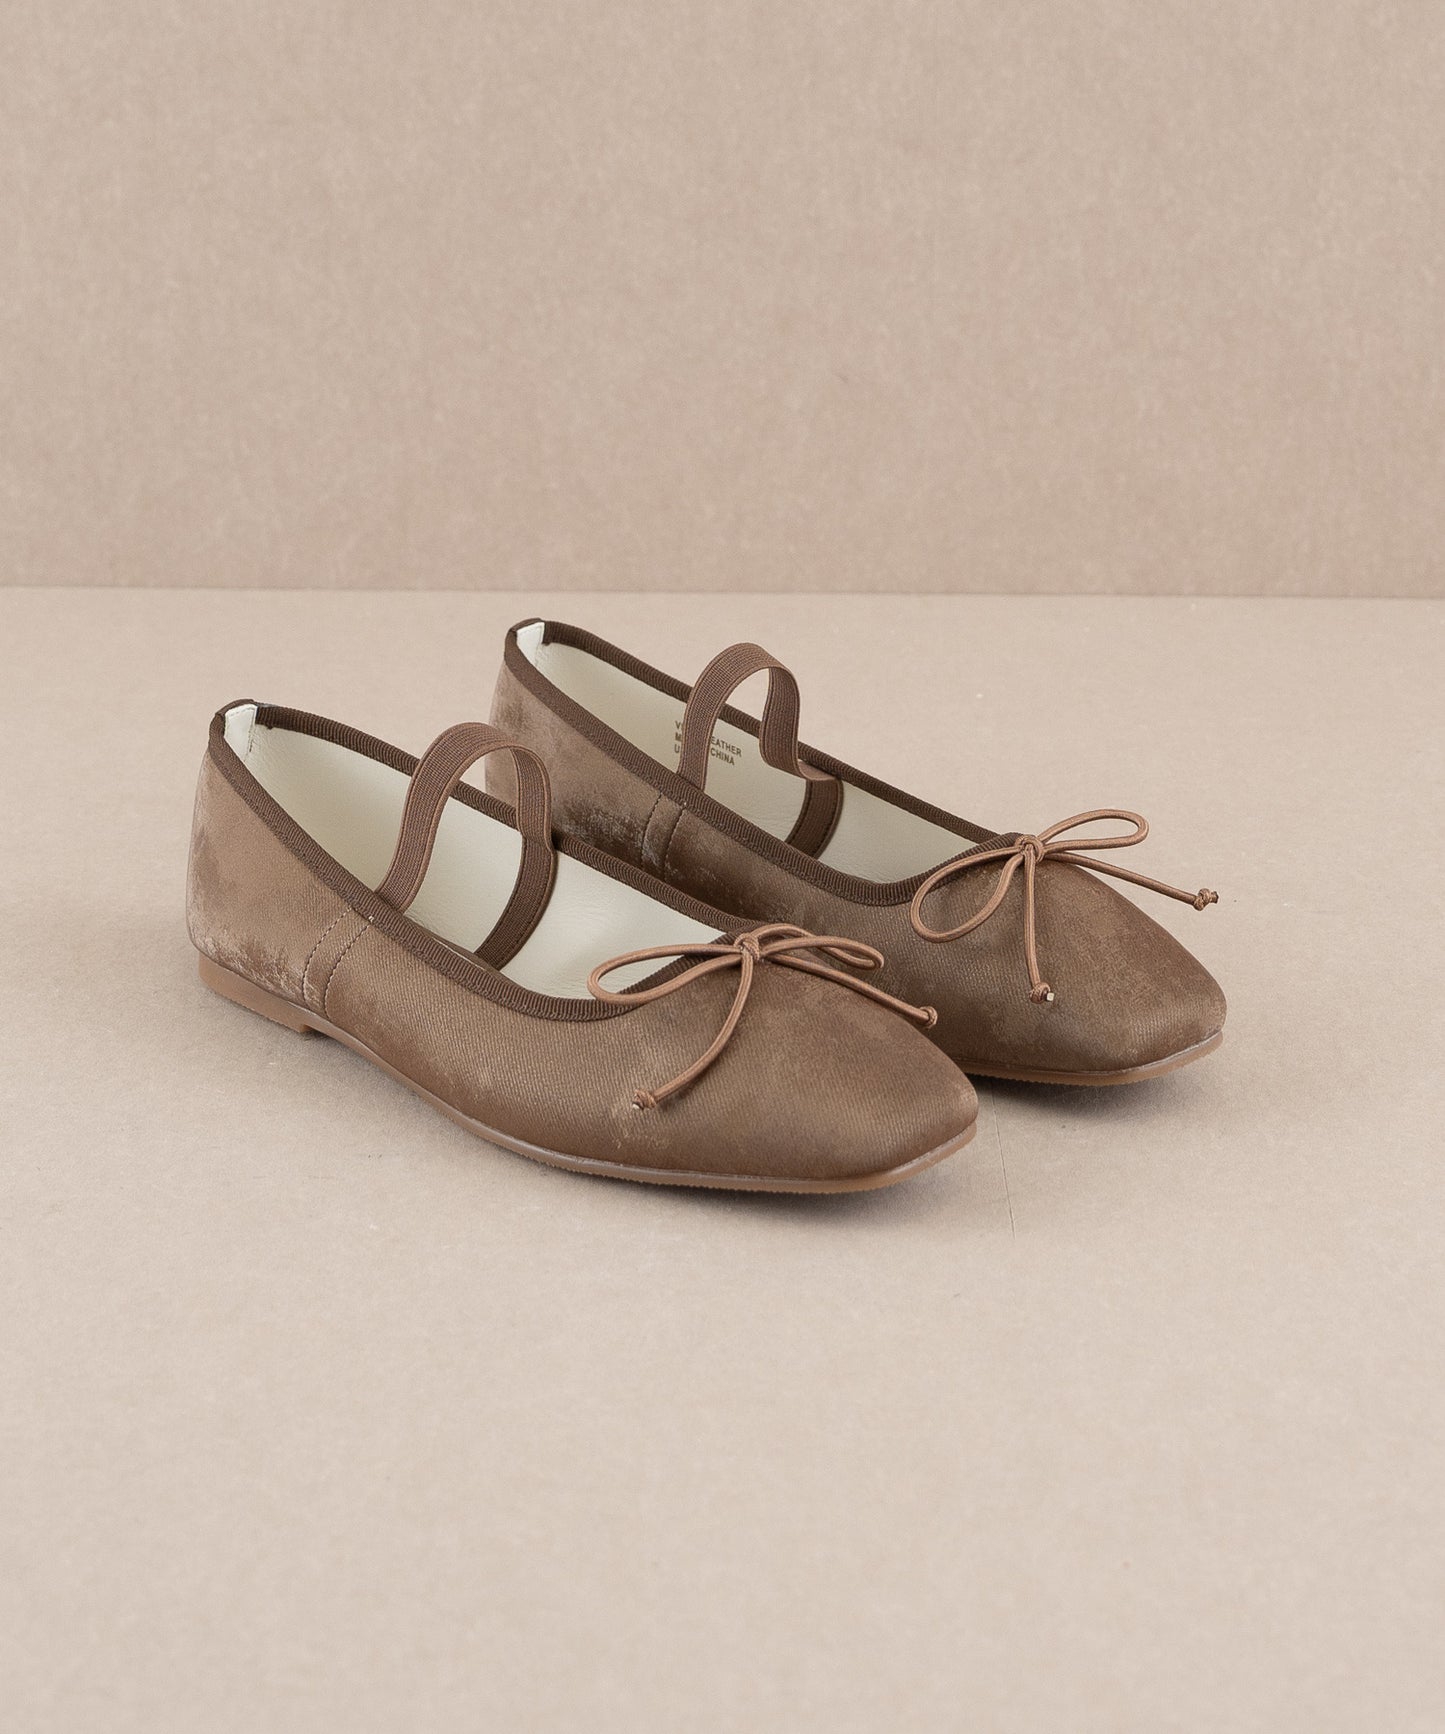 The London Ballet Pointe Flats (2 Options)